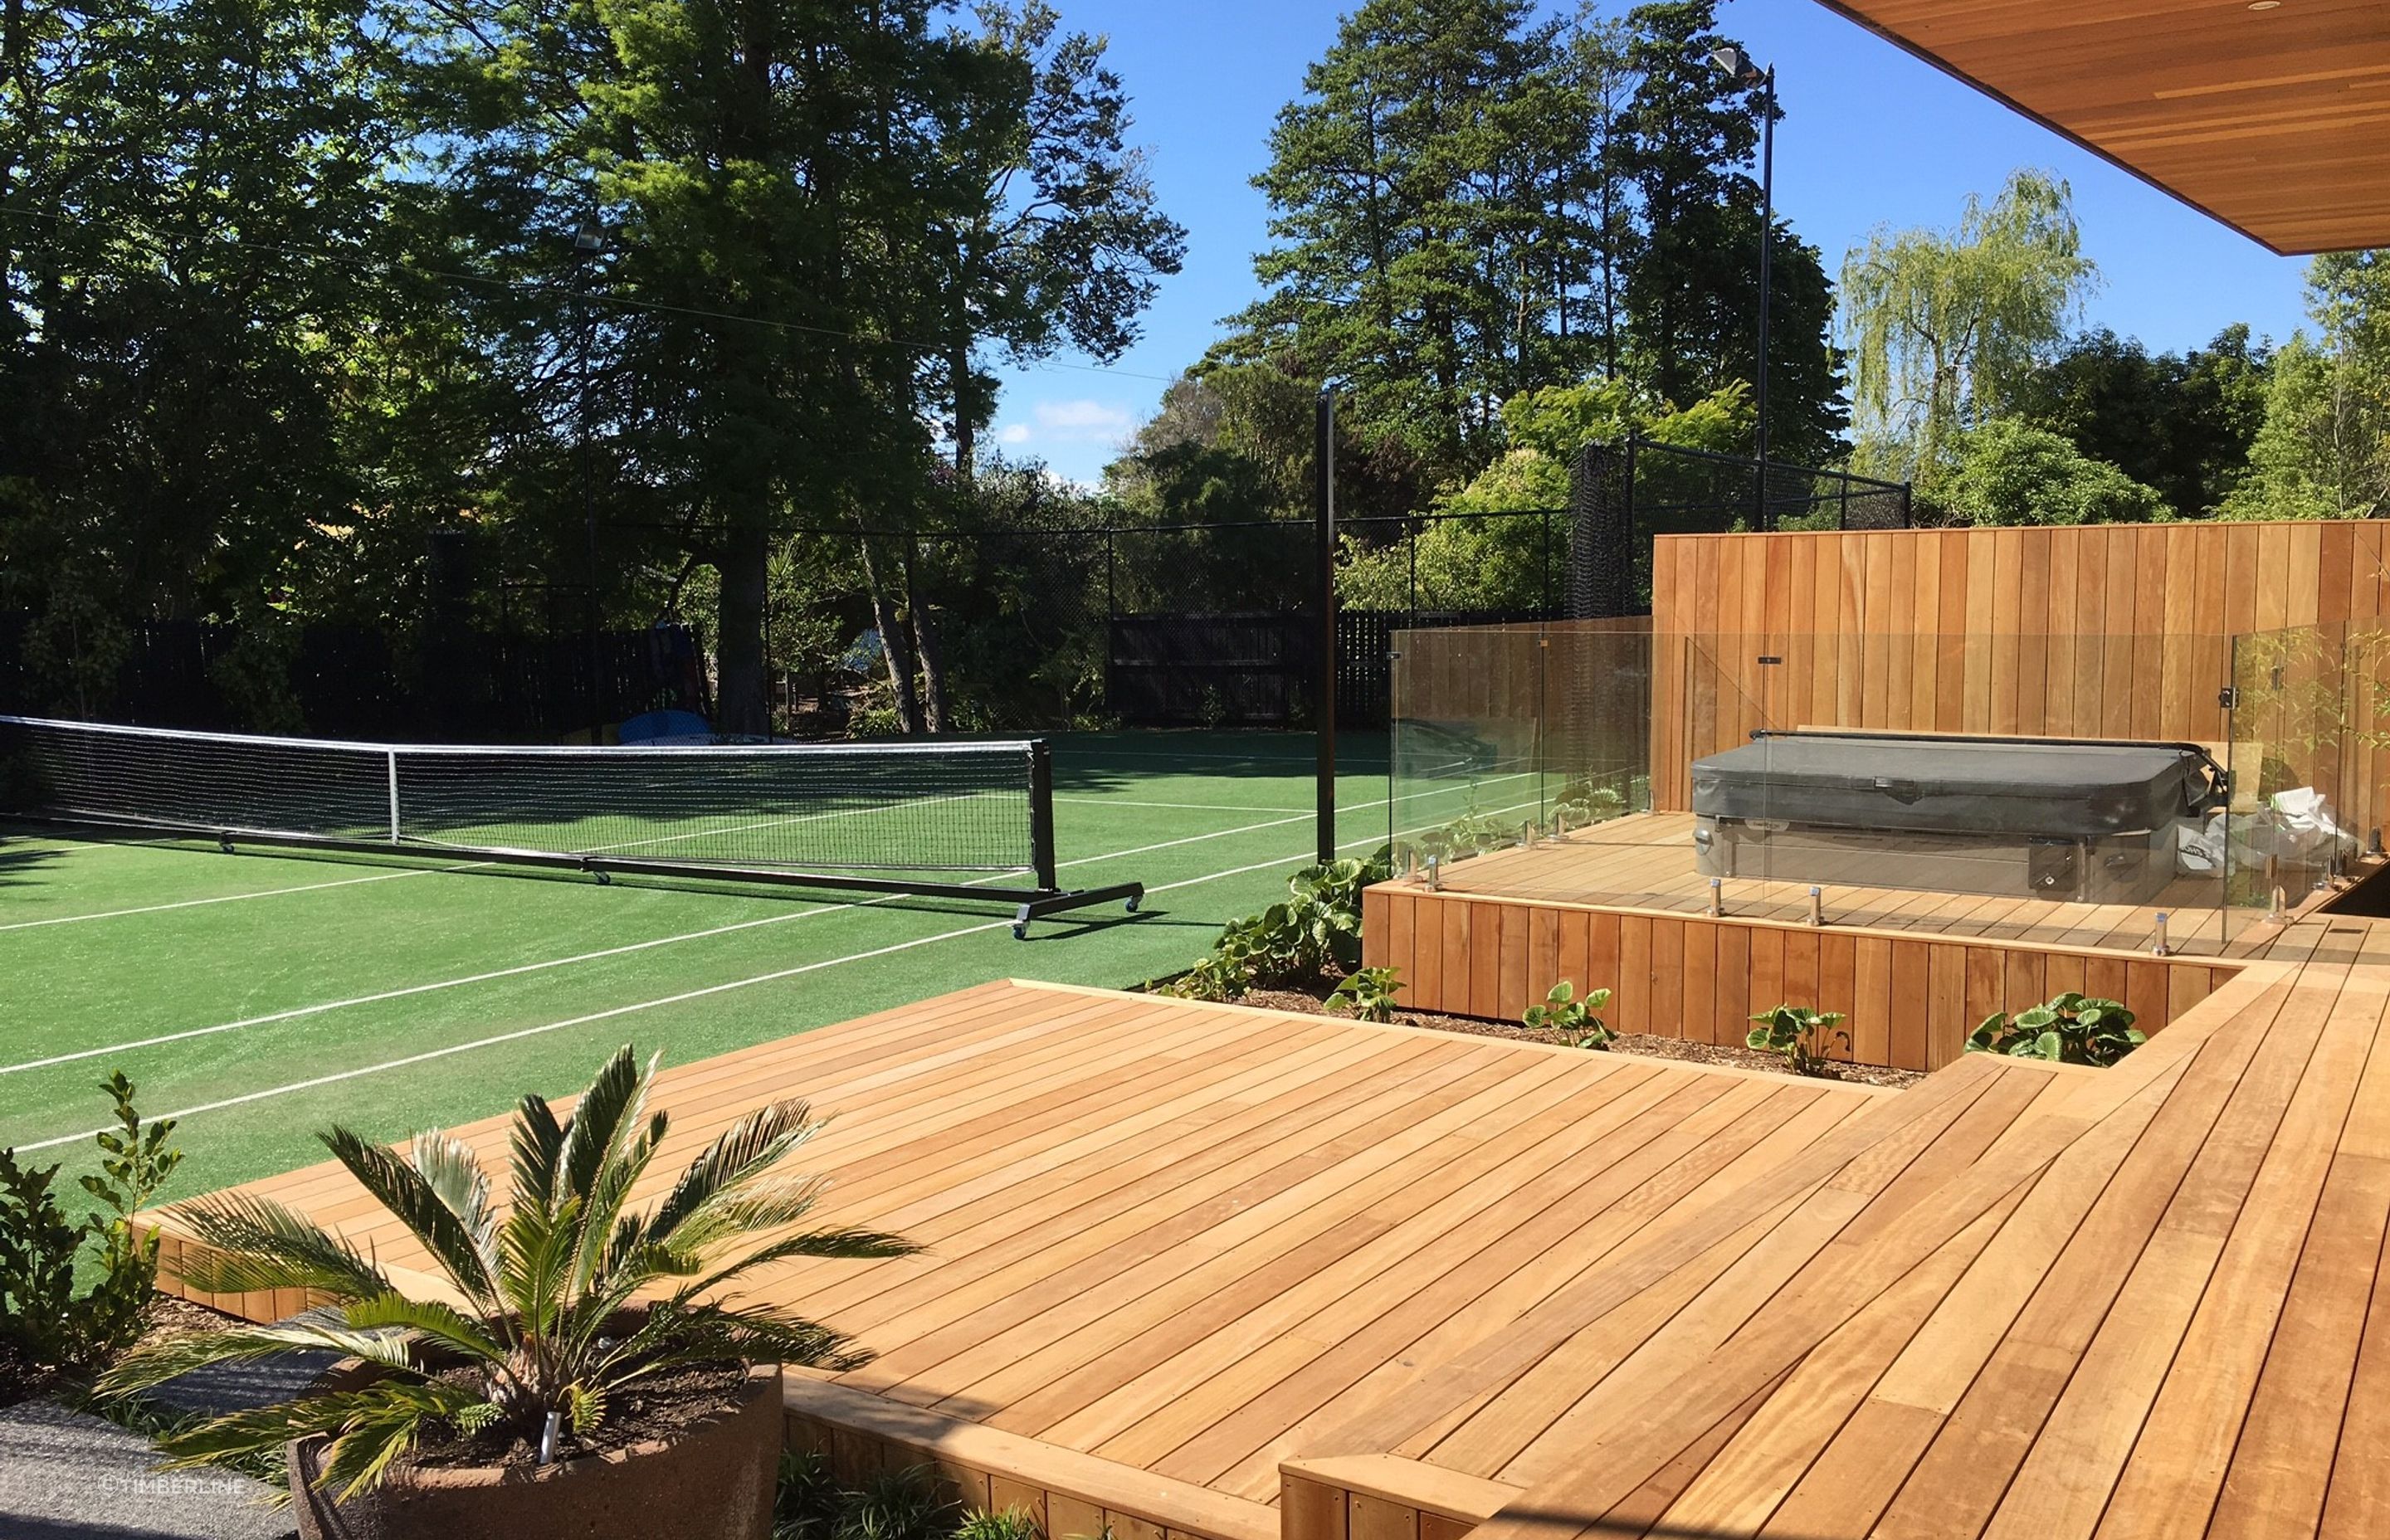 Attractive golden coloured hues of Garapa Hardwood Decking by Timberline